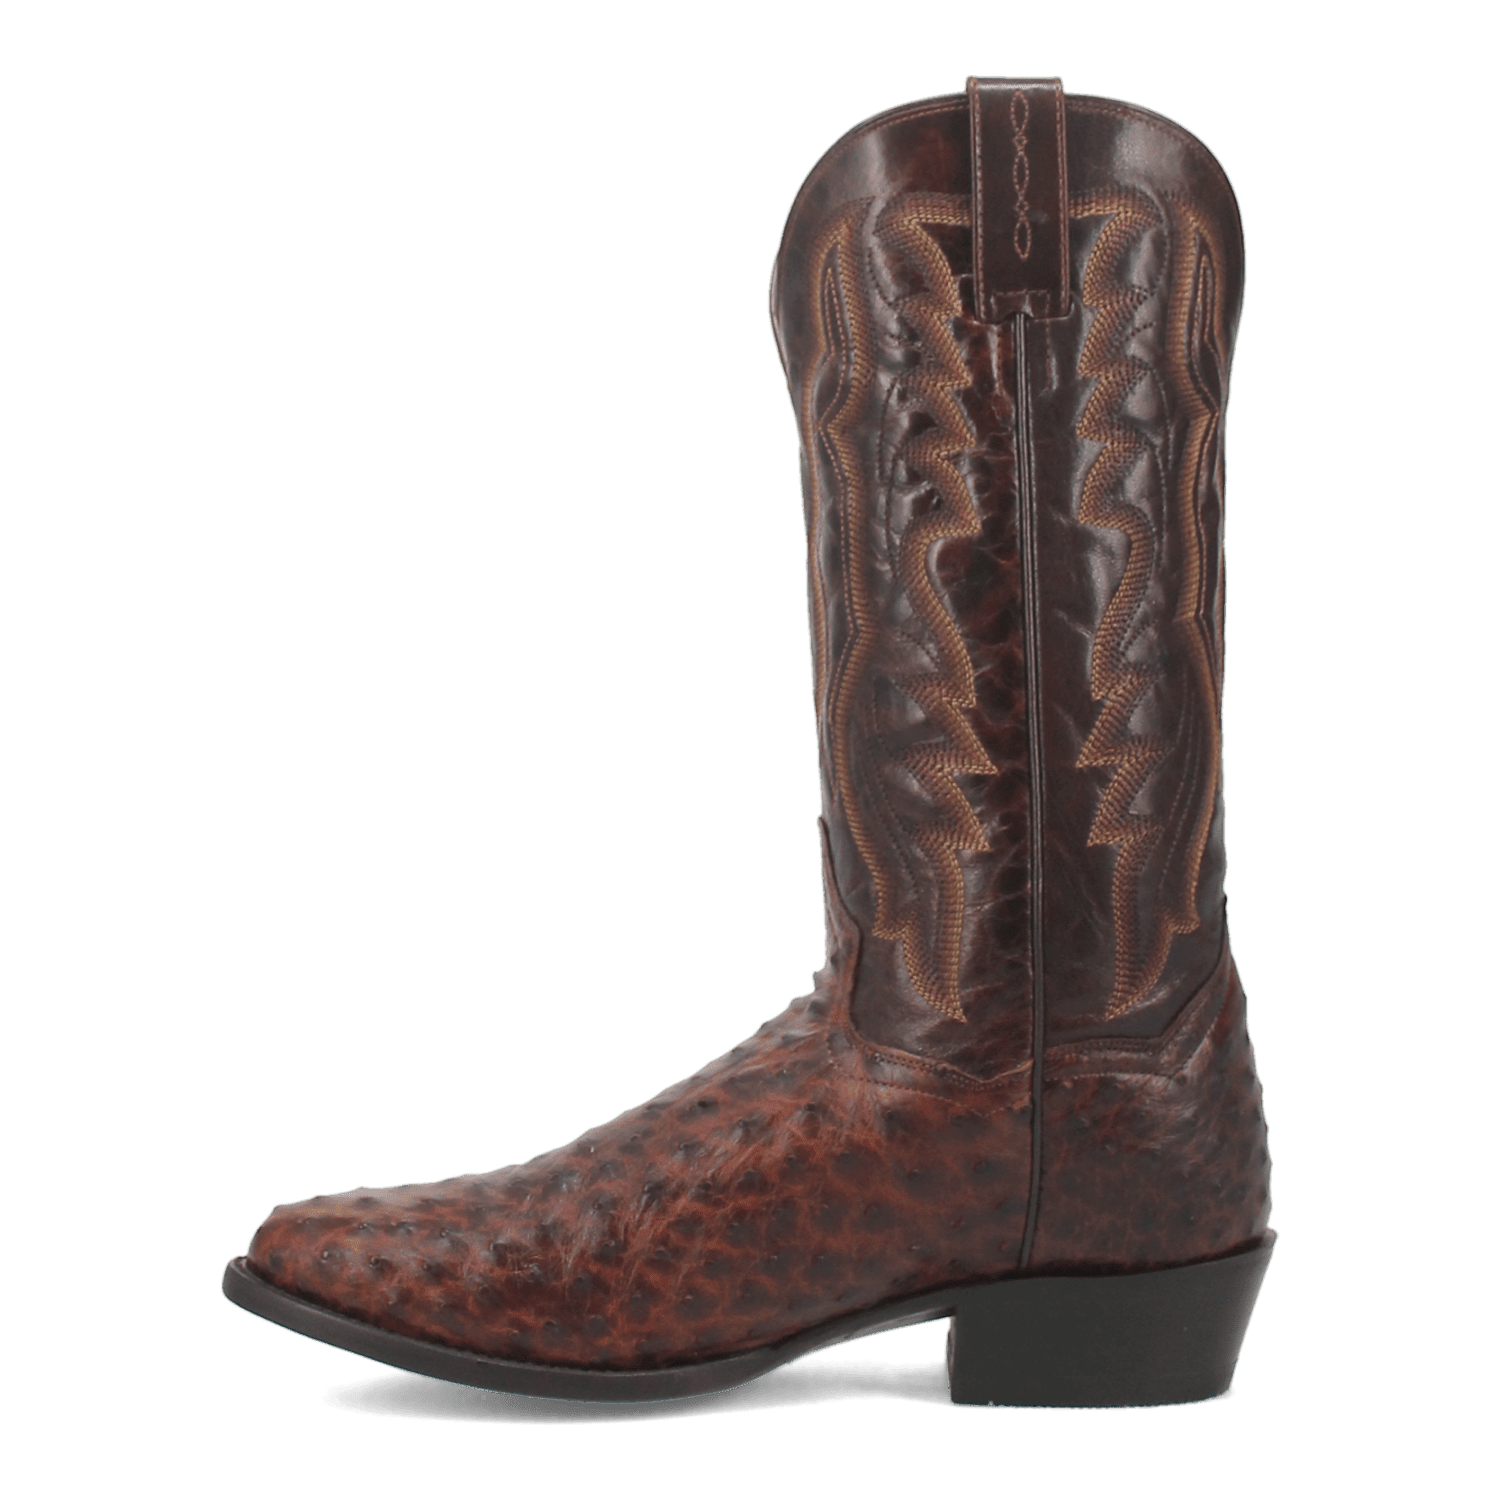 PERSHING FULL QUILL OSTRICH BOOT Image